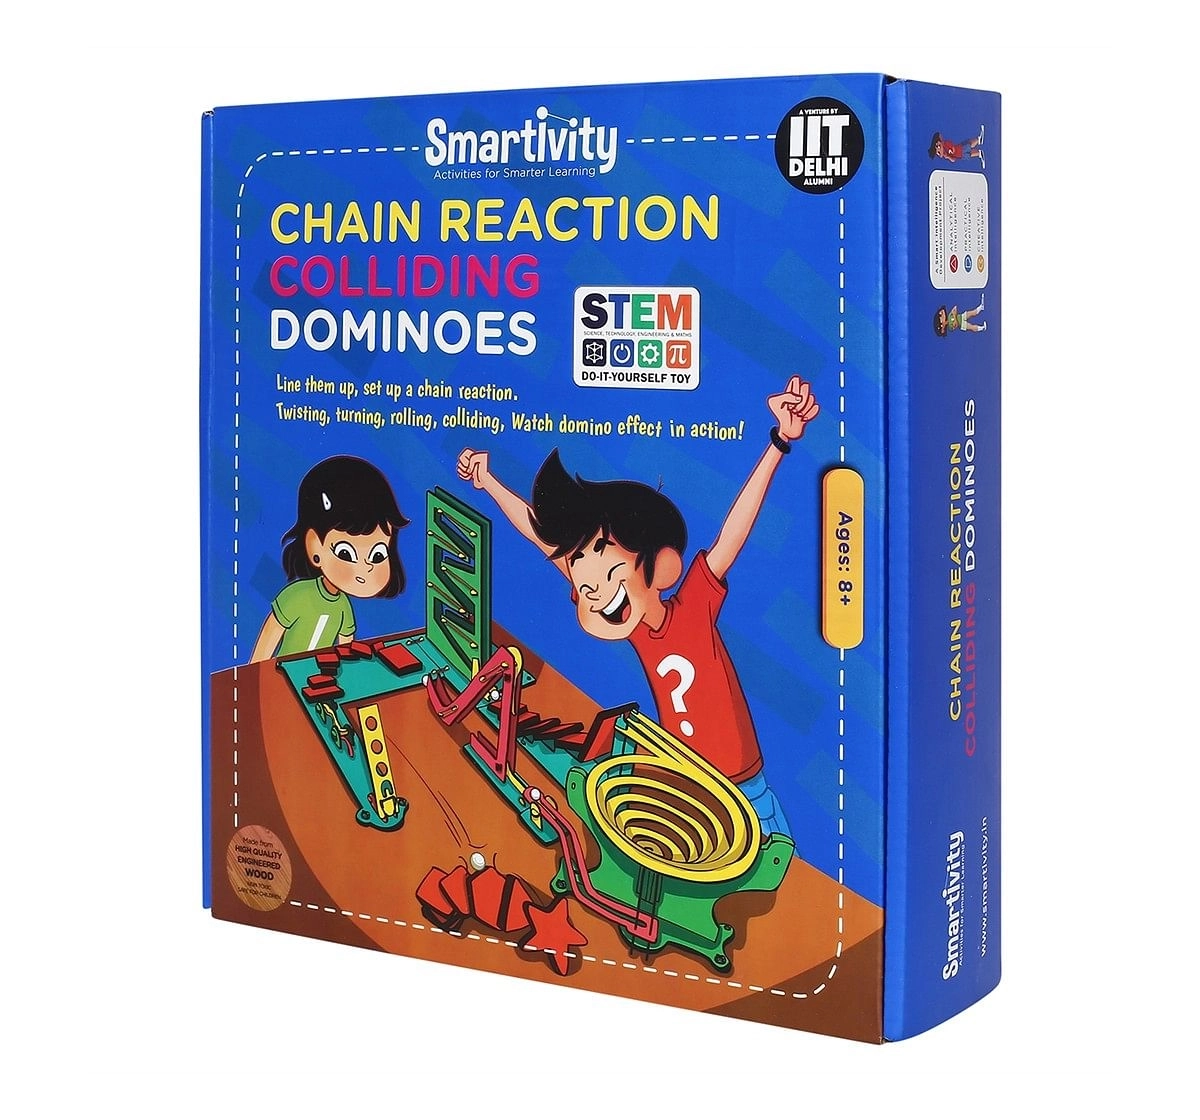 Smartivity Chain Reaction Colliding Dominoes: Stem, Learning, Educational and Construction Activity Toy for Kids age 8Y+ 